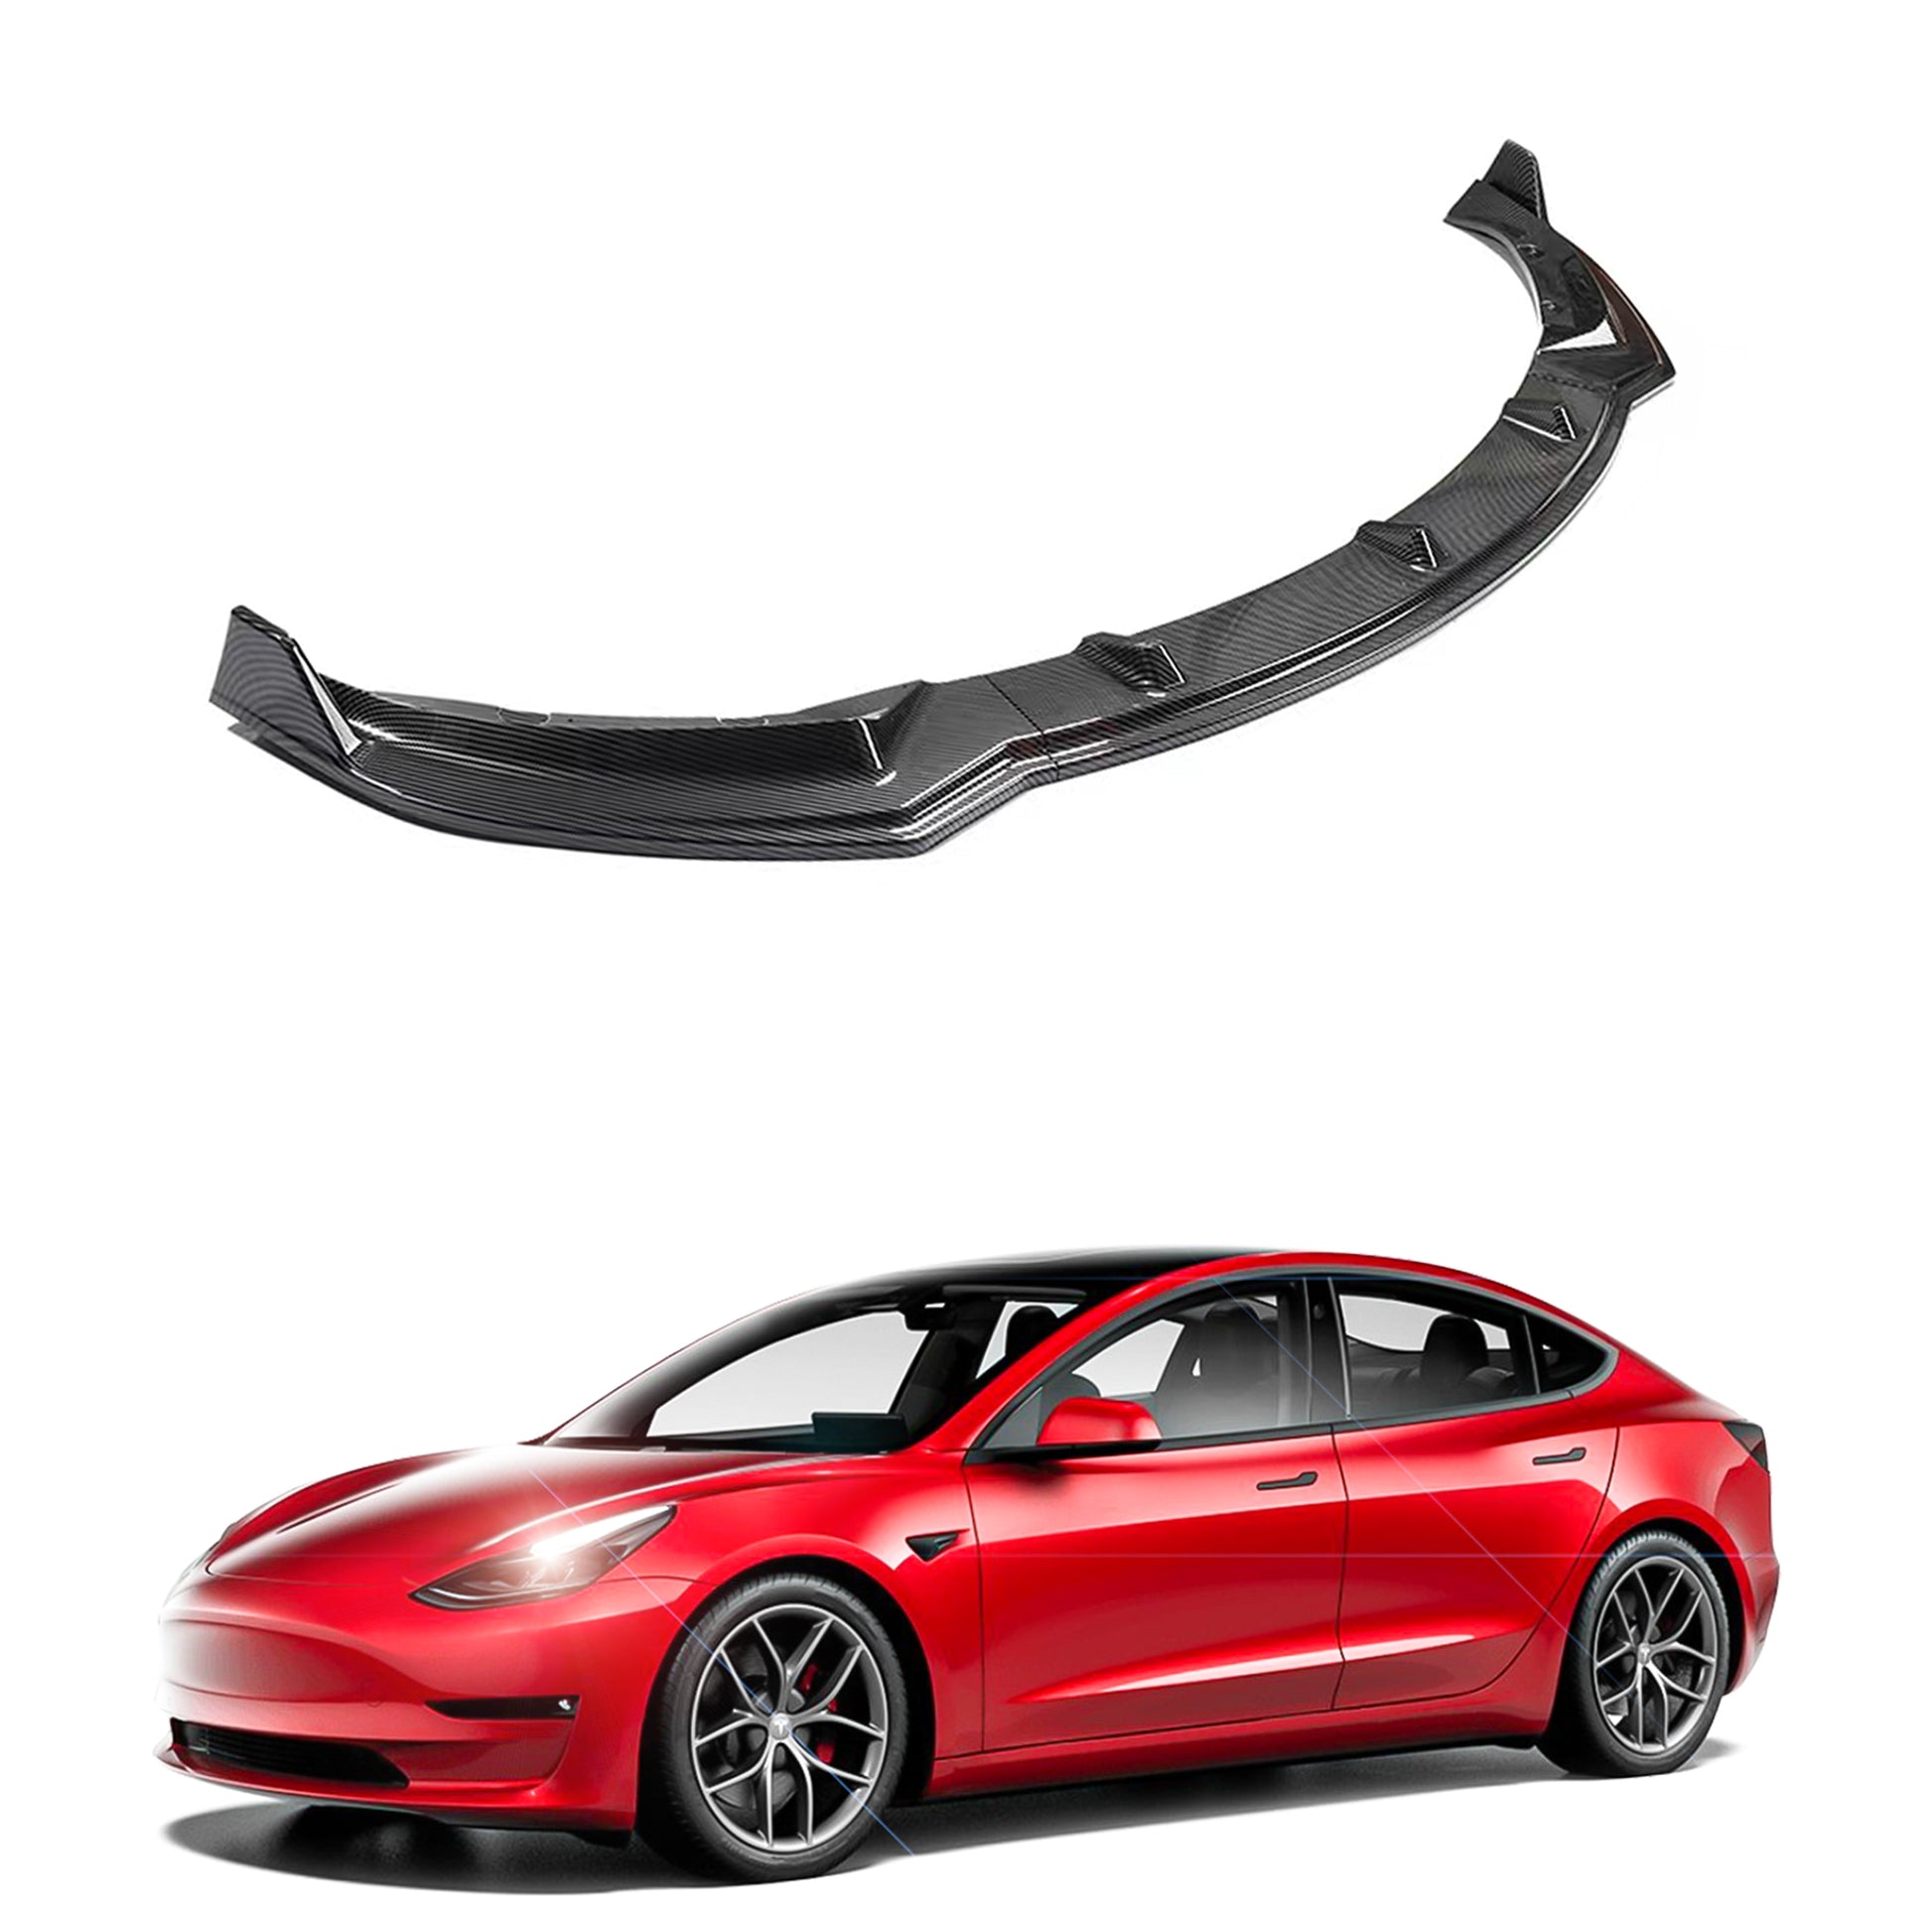 tesla model 3 front bumper lip spoiler splitter install car 2022 2023 2021 2020 2019 2018 s3xy arcoche accessories accessory aftermarket price Vehicles standard long range performance sr+ electric car rwd ev interior exterior diy decoration price elon musk must have black white red blue 5 7 seats seat